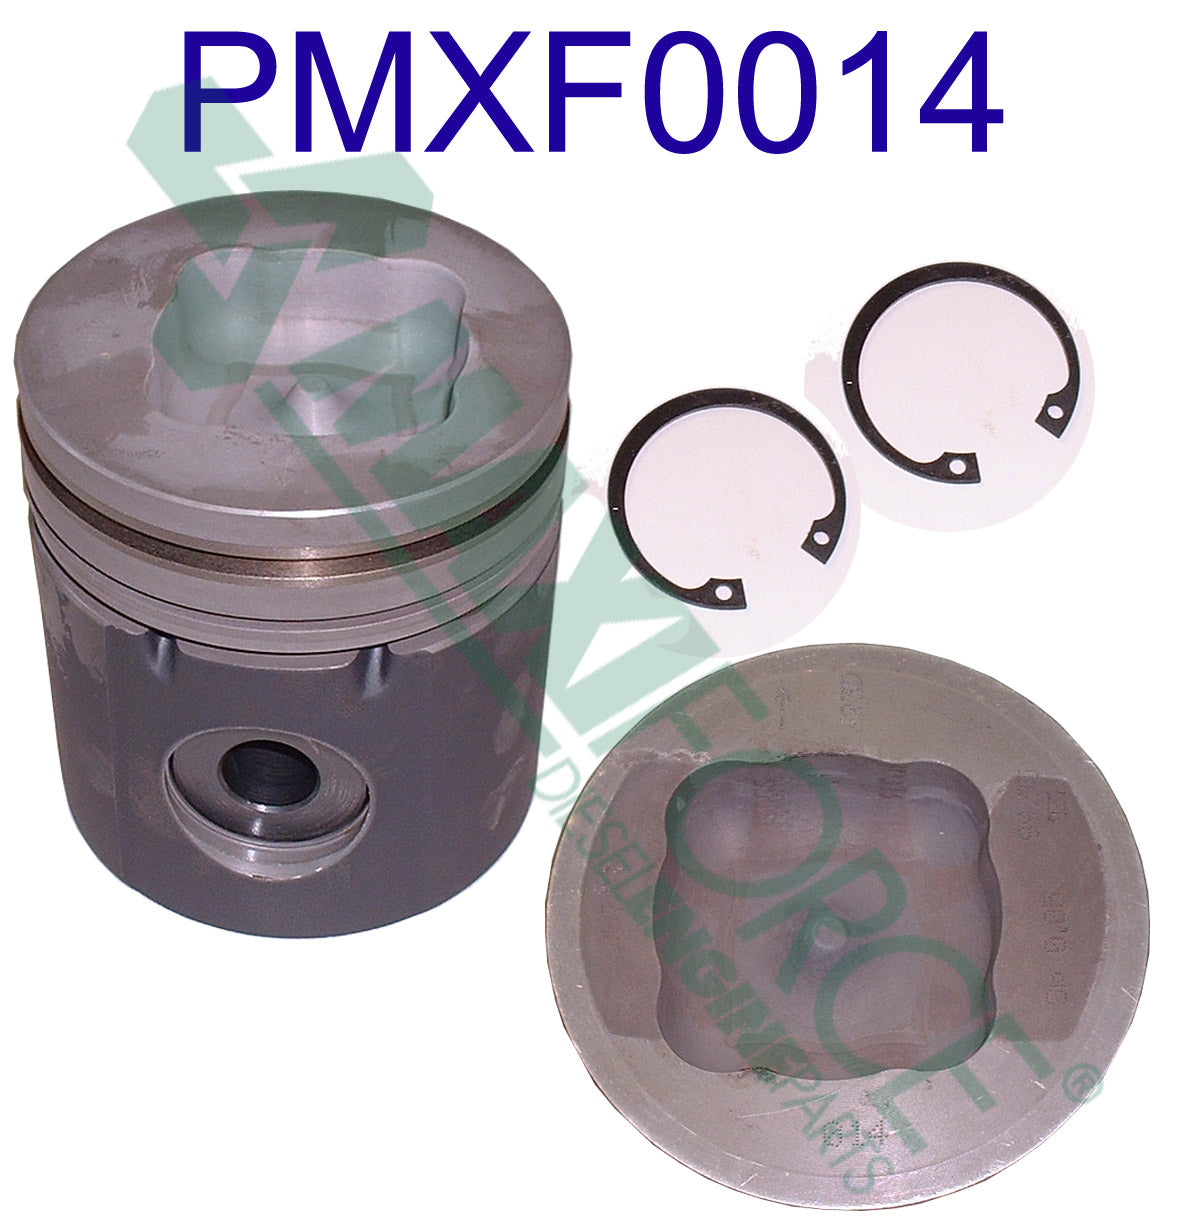 PMXF0014 PERKINS 1006-6T PISTON, WITH PIN AND CLIPS